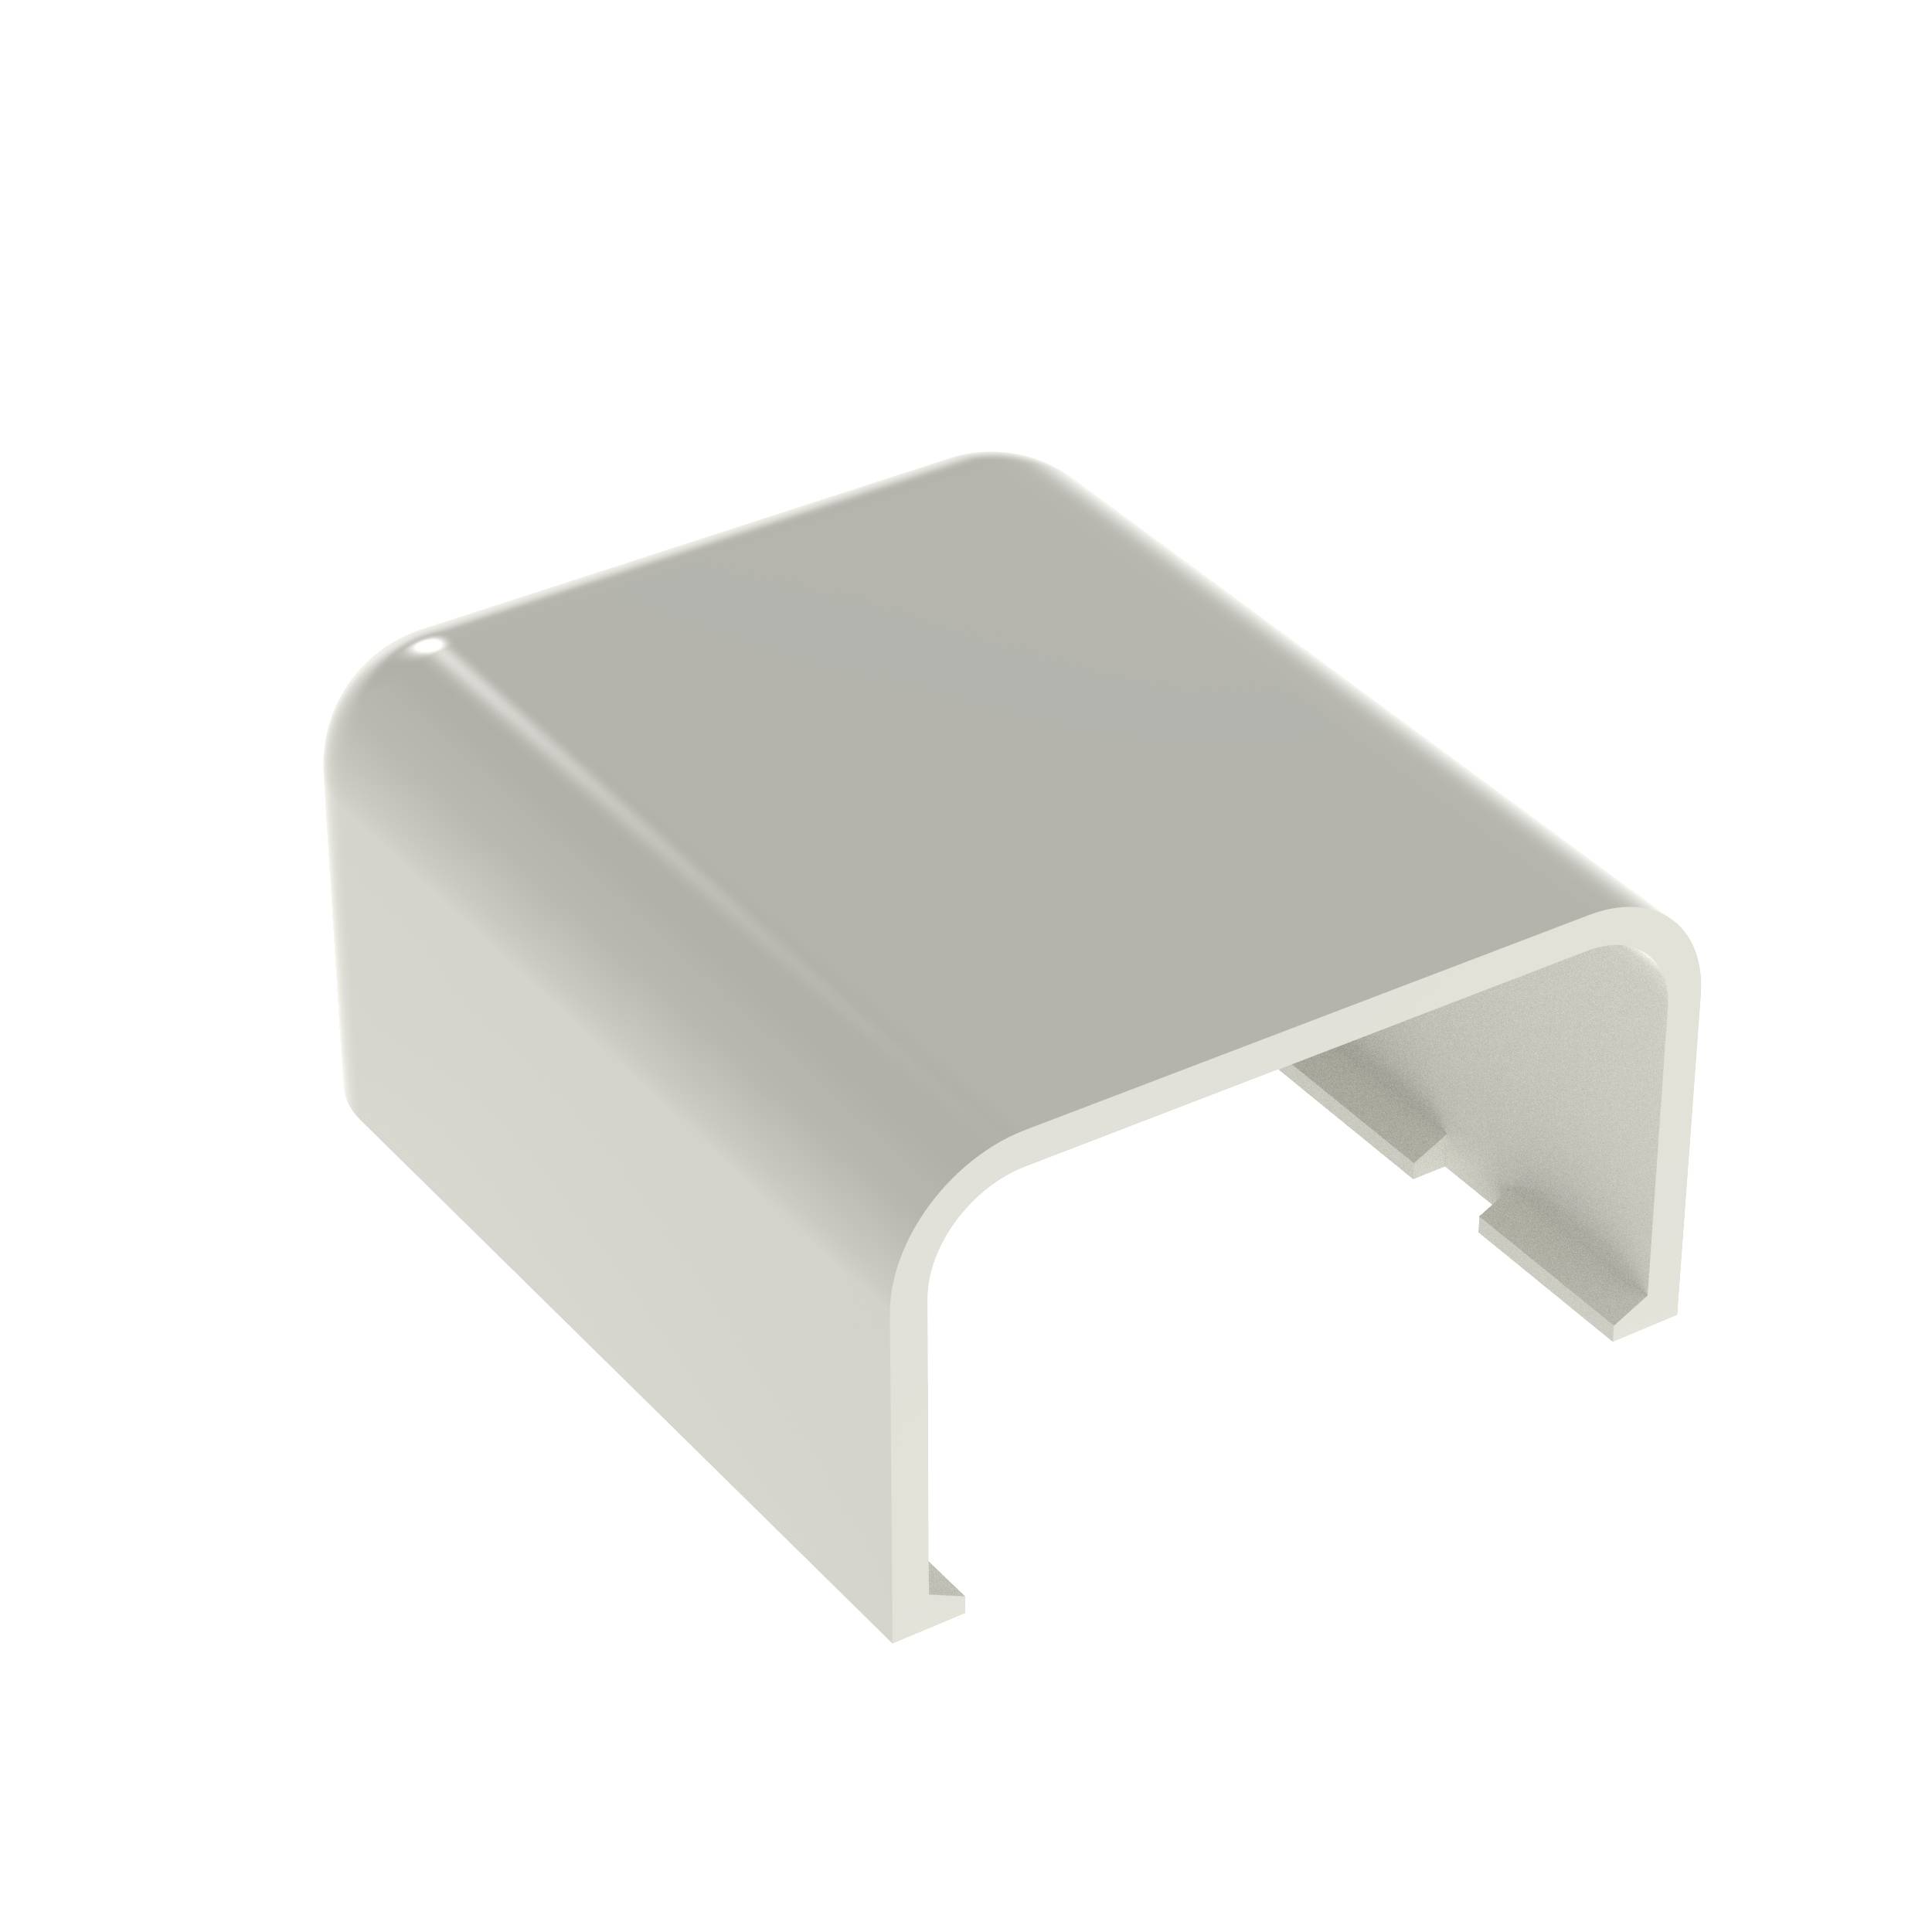 Panduit® Pan-Way® ECF10IW-X Low Voltage End Cap Fitting, For Use With Pan-Way® LD10 Series Surface Raceway System, ABS, Off-White